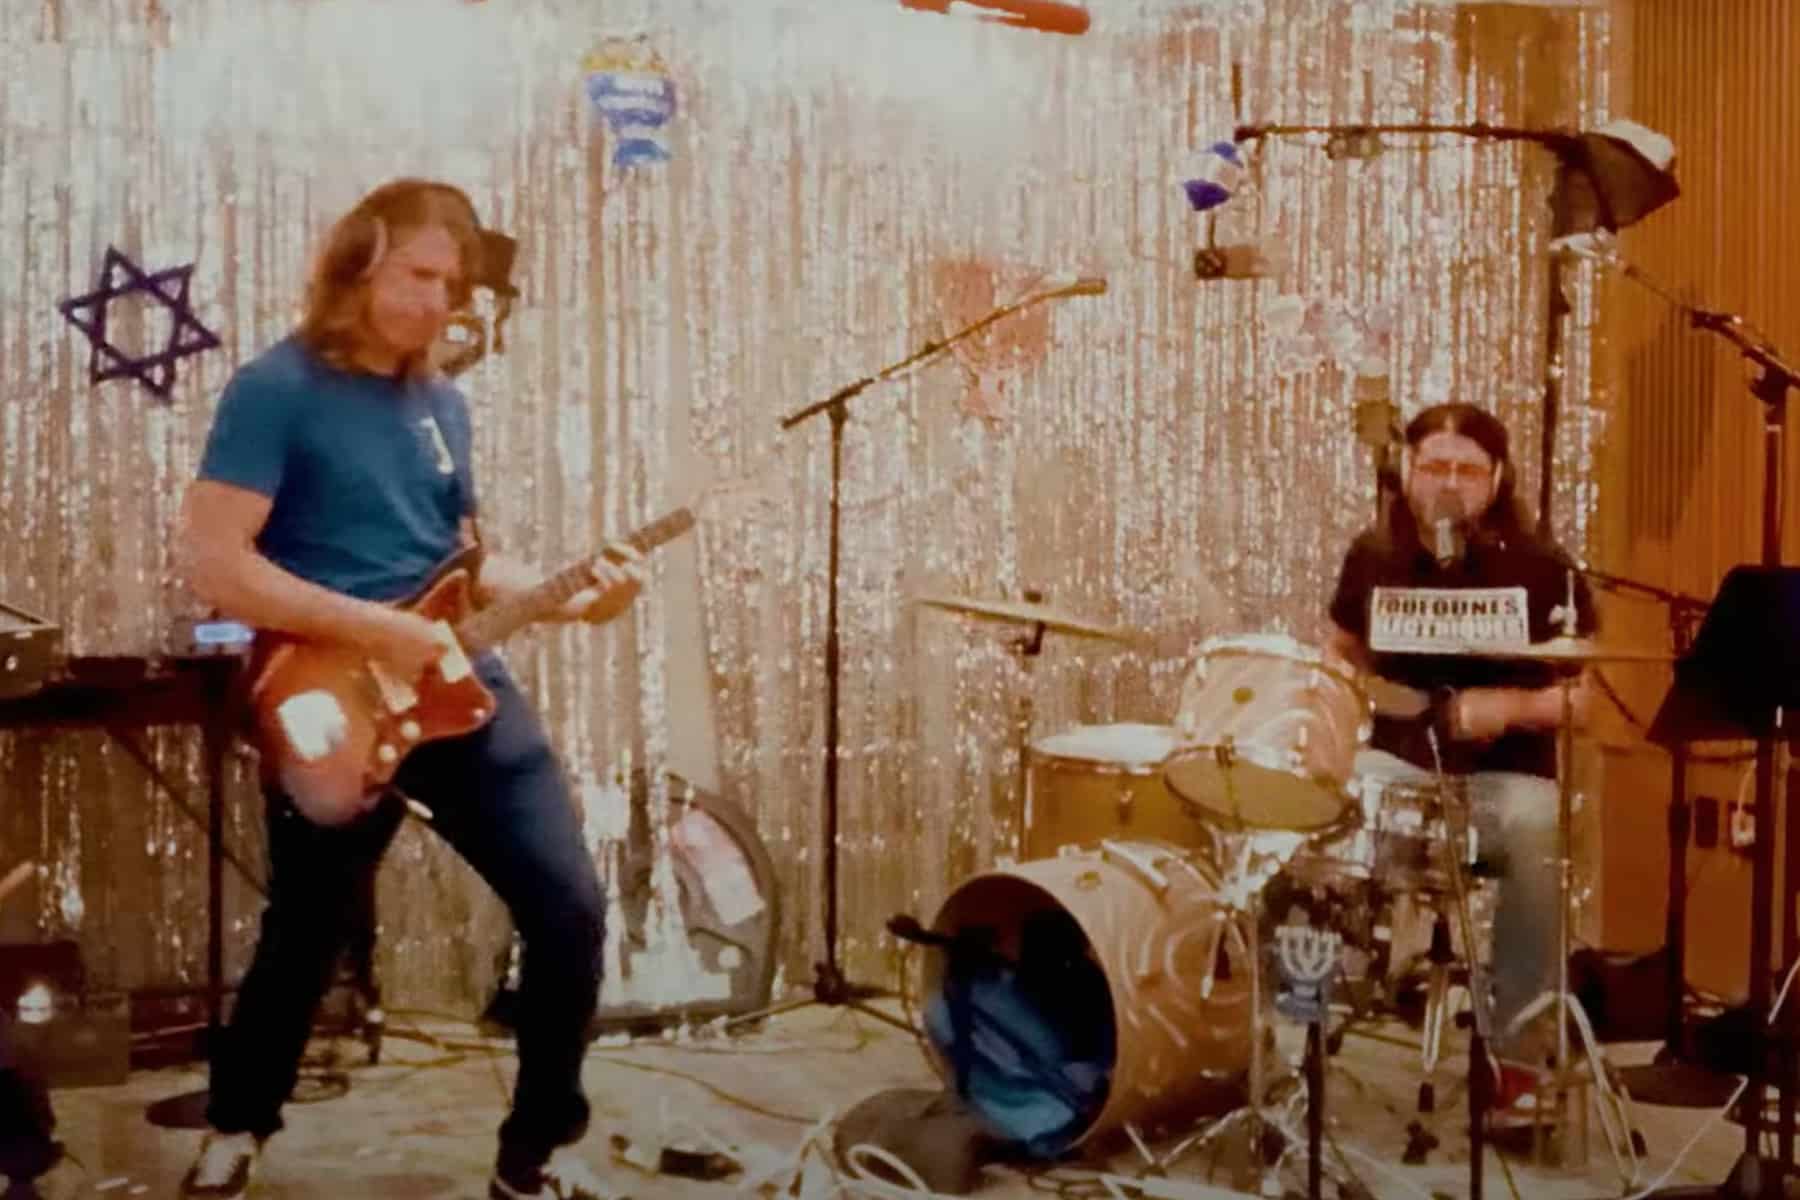 DAVE GROHL And GREG KURSTIN Release Cover Of VAN HALEN’s “Jump”